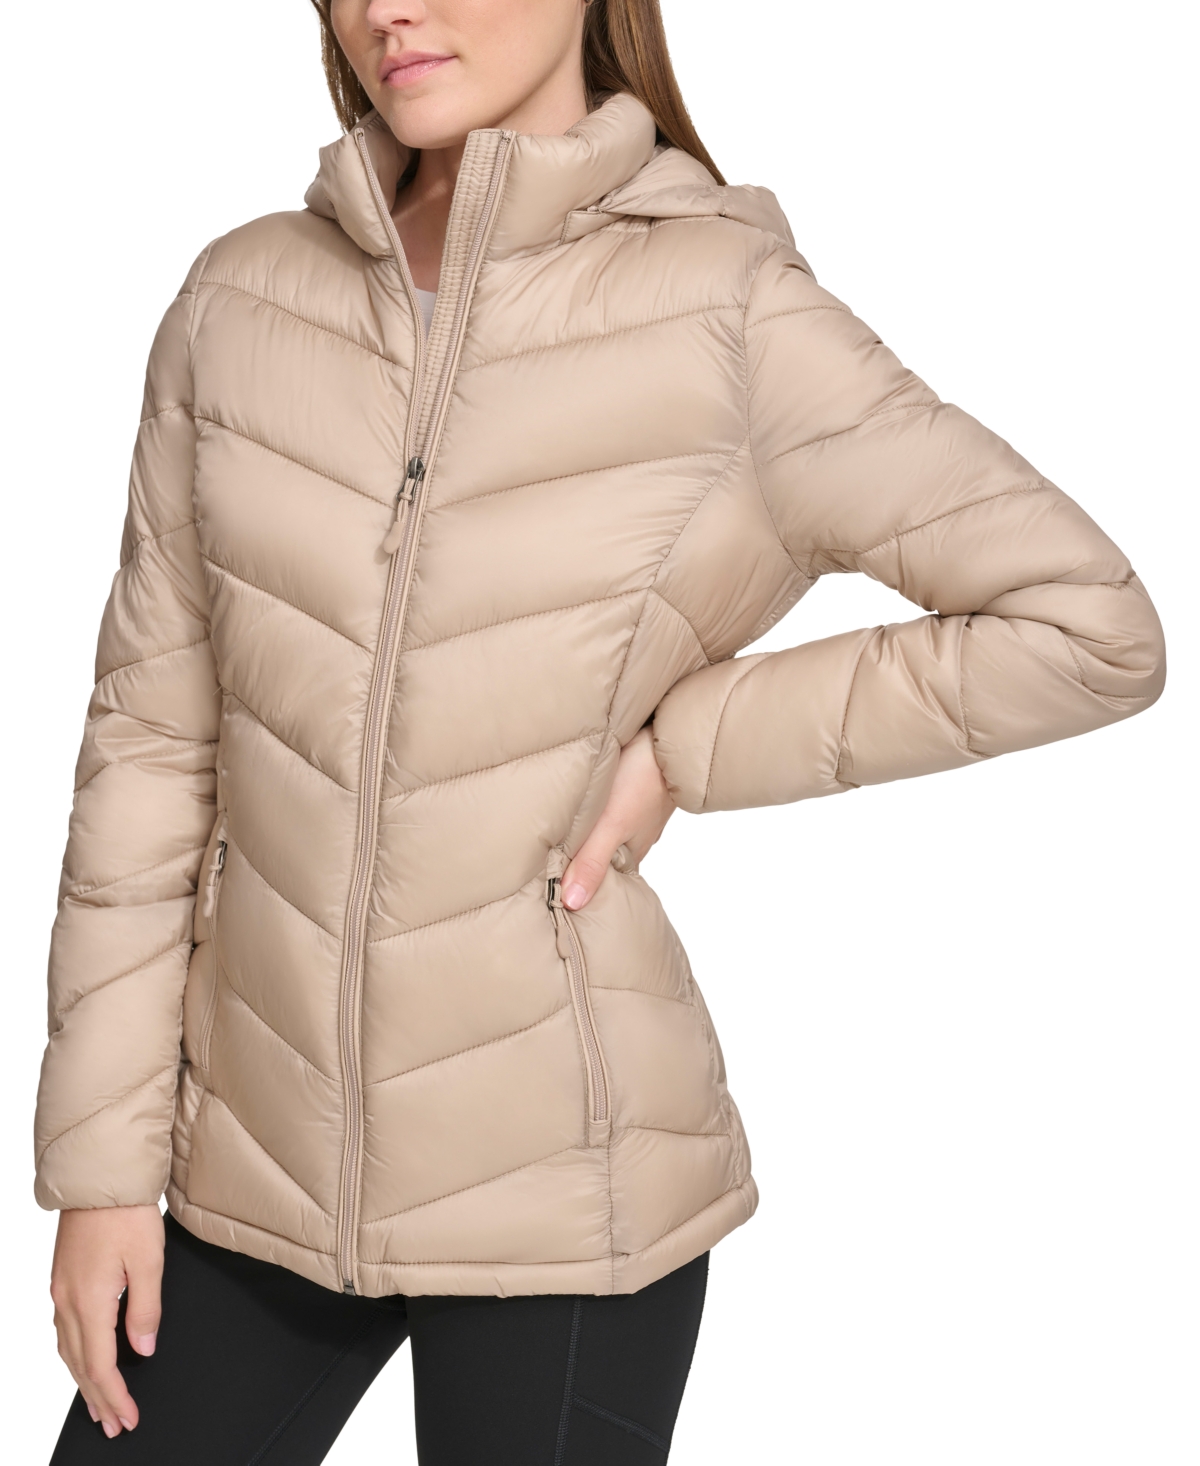 Women's Packable Hooded Puffer Coat, Created for Macy's - Sand